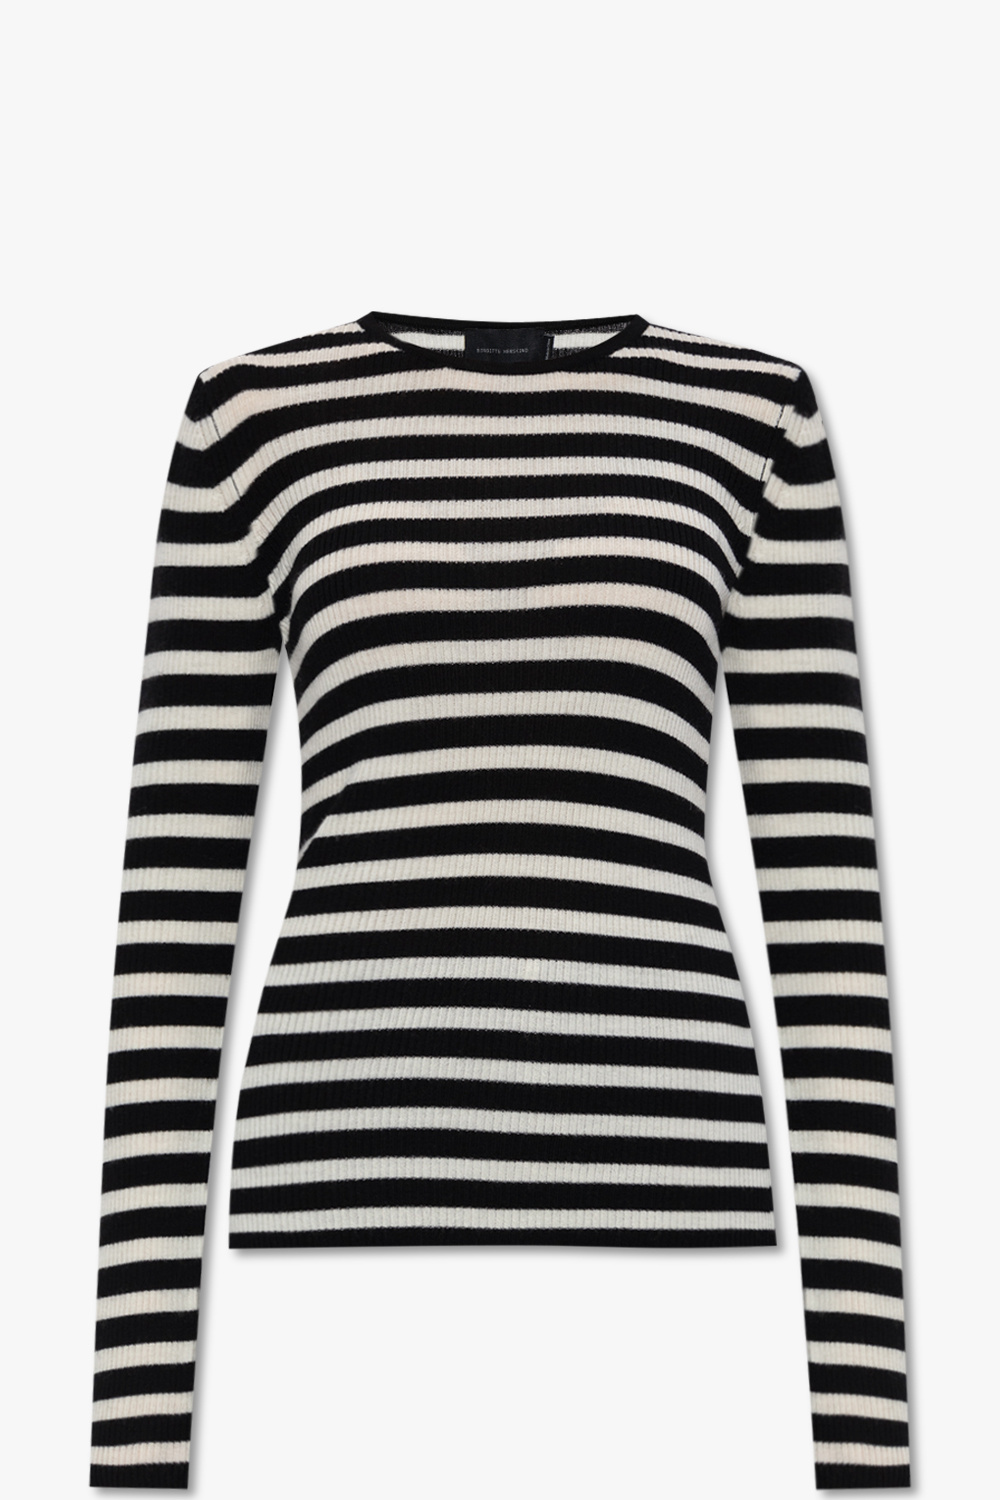 HERSKIND ‘Camb’ Shirts sweater